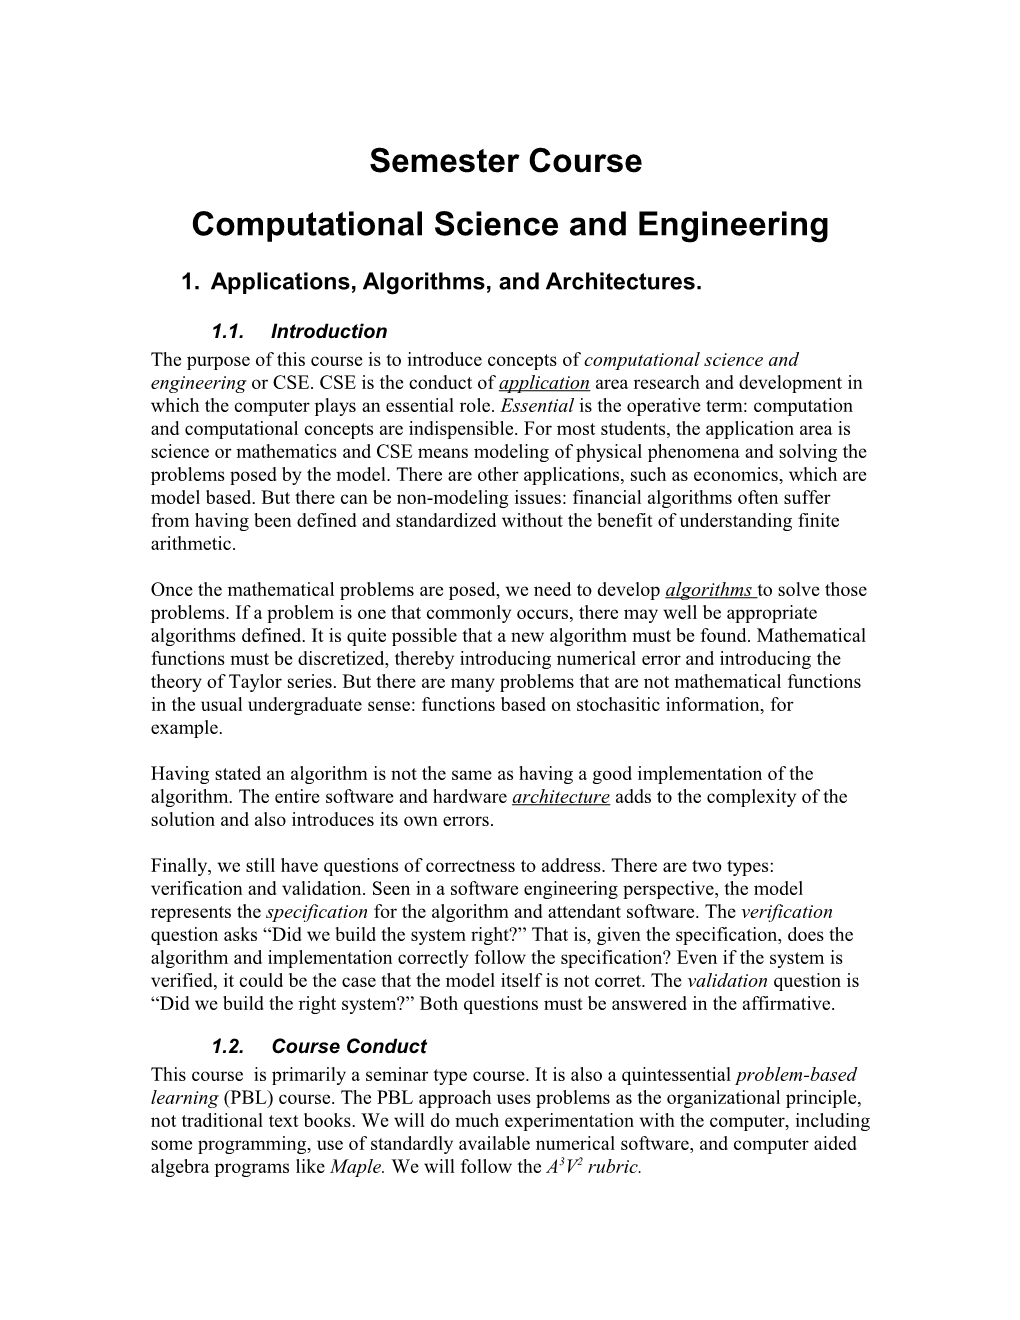 Project Book for Computational Science and Engineering